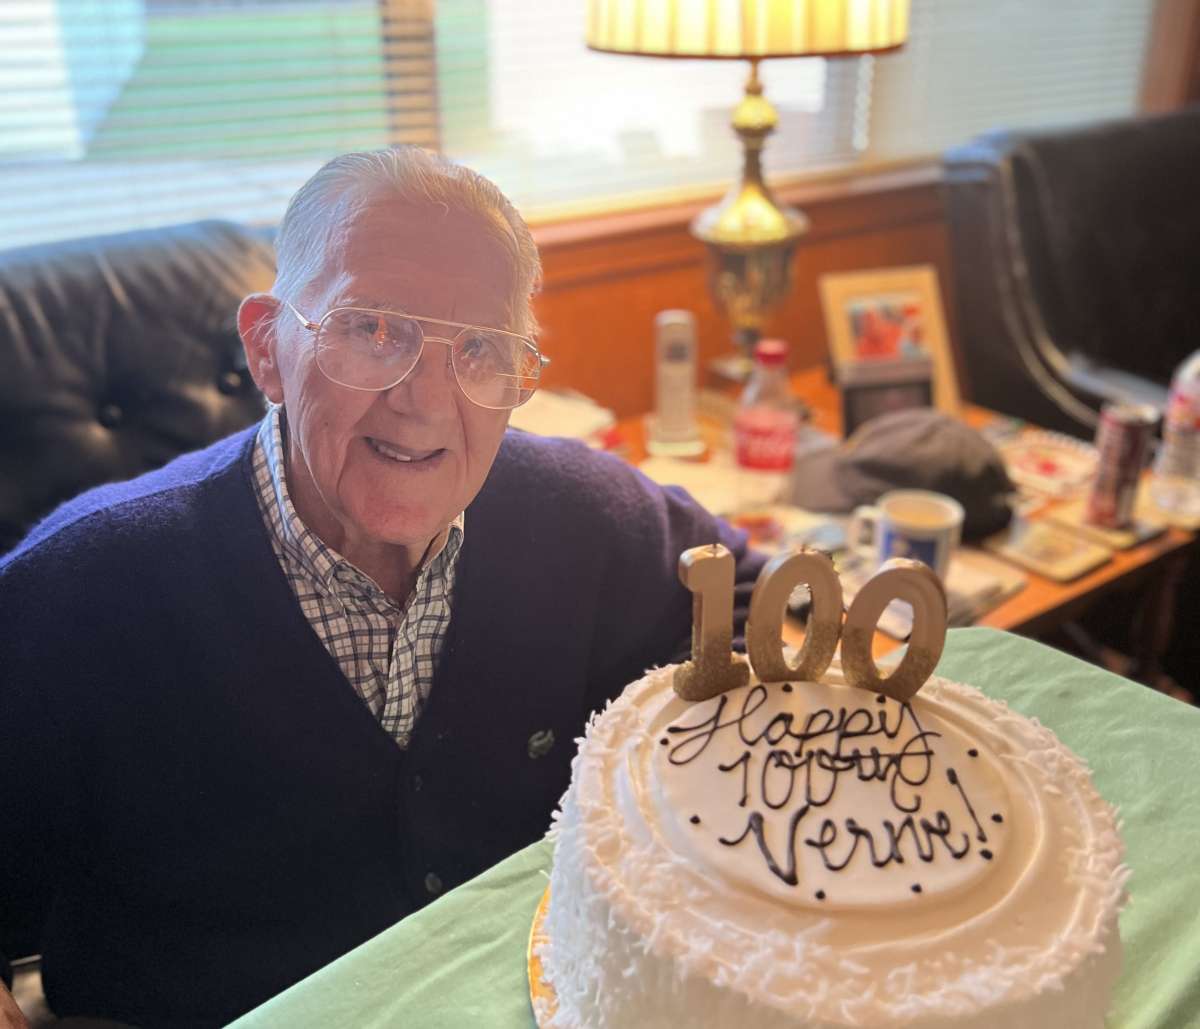 Verne Harms, 100th birthday party